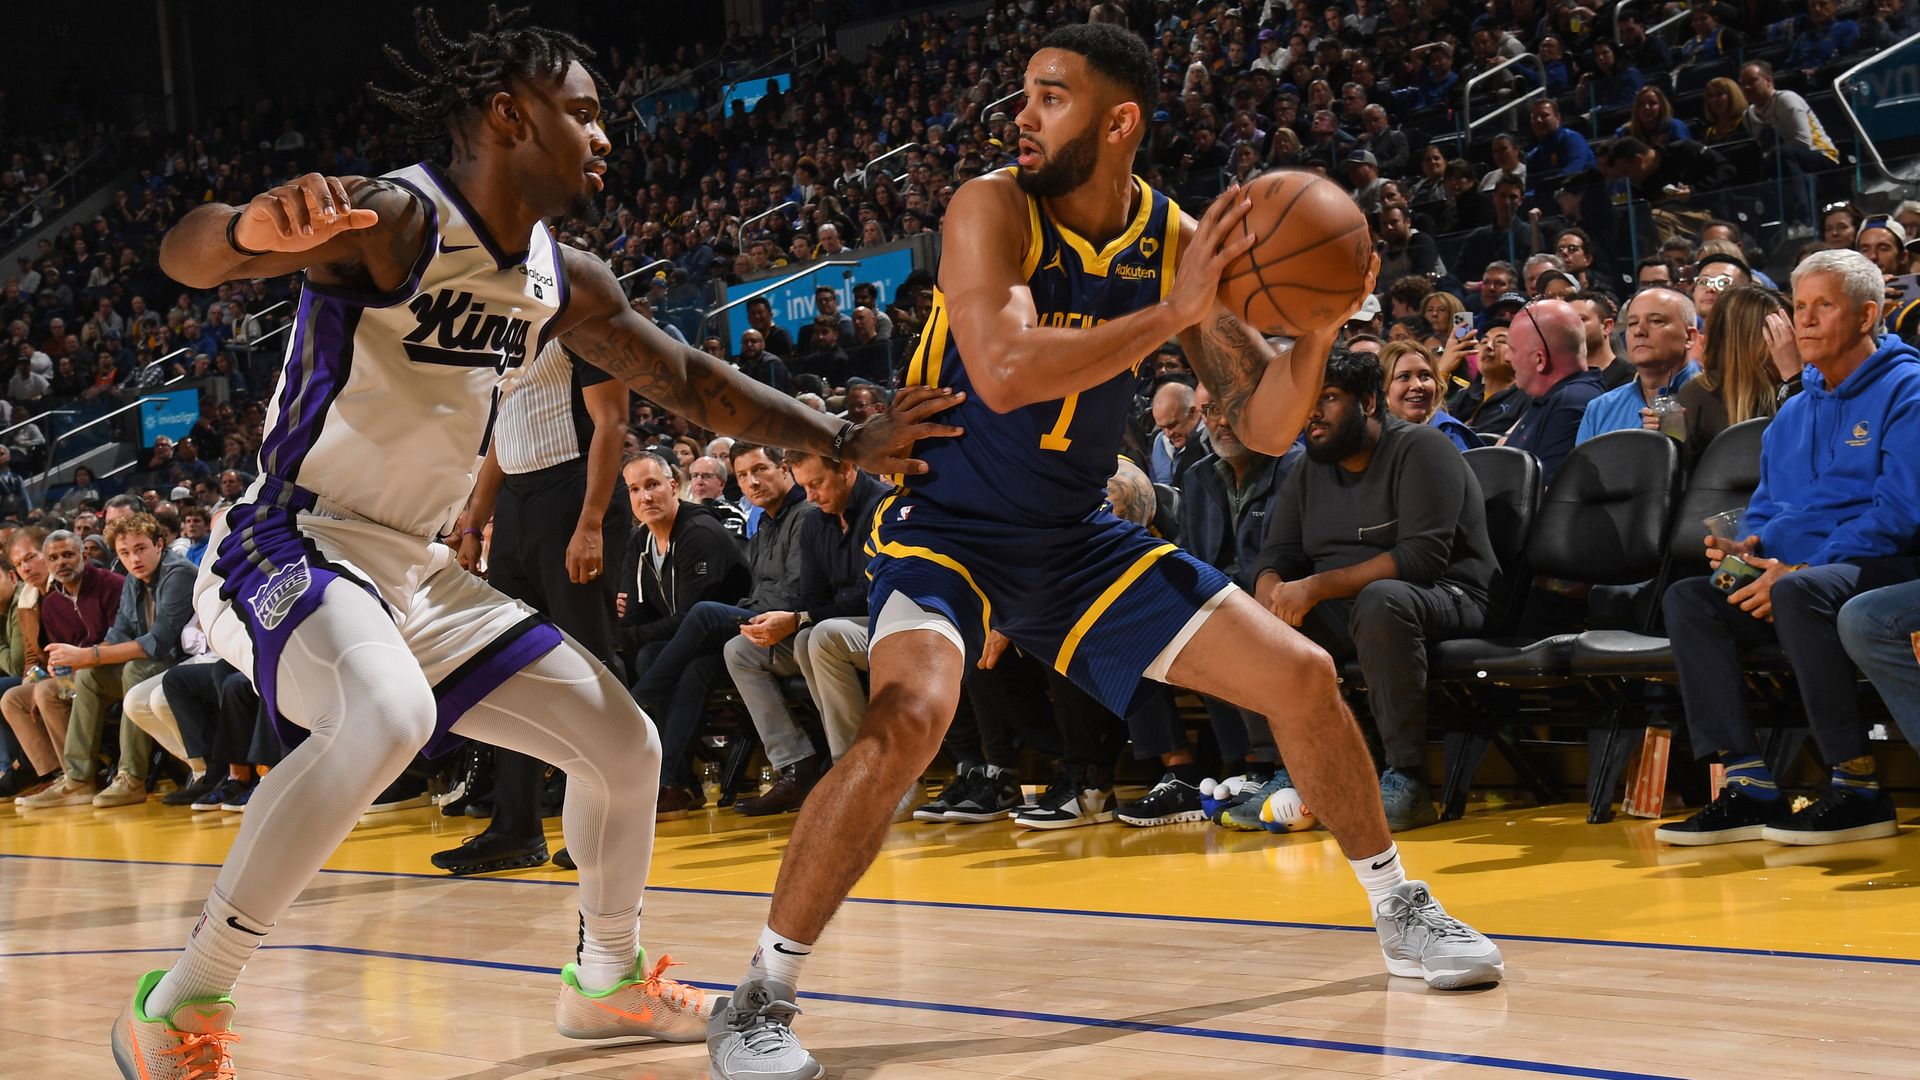 Cory Joseph (No. 1) of the Golden State Warriors looks to pass the ball during the game against the Sacramento Kings on January 25, 2024 at Chase Center. Photo: Noah Graham/NBAE via Getty Images